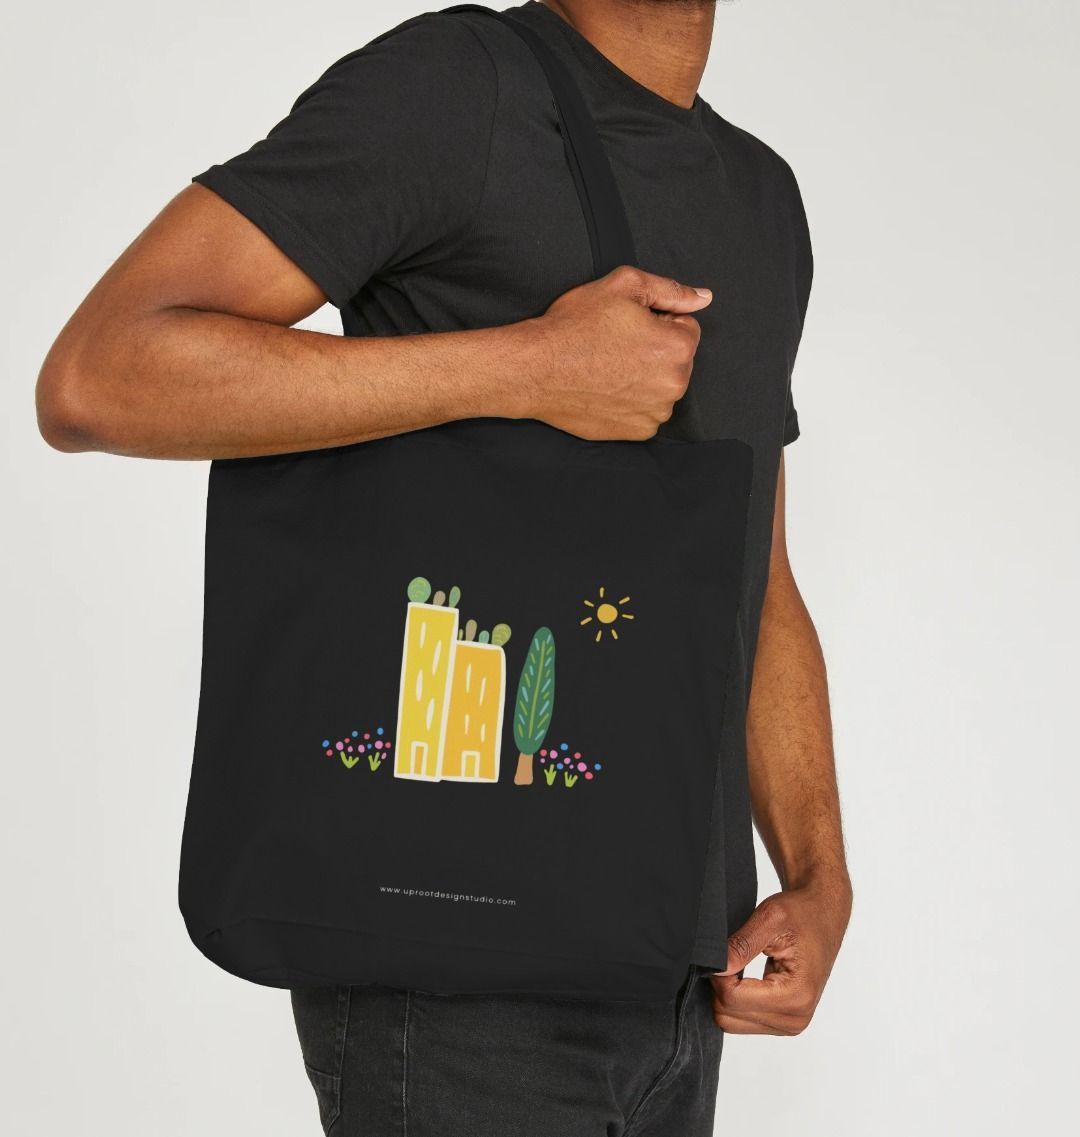 Green Cities 100% Organic Cotton Grocery Black Tote Bag w. Colorful Apartment Buildings, Rooftop Garden, Sun, Tree & Flowers